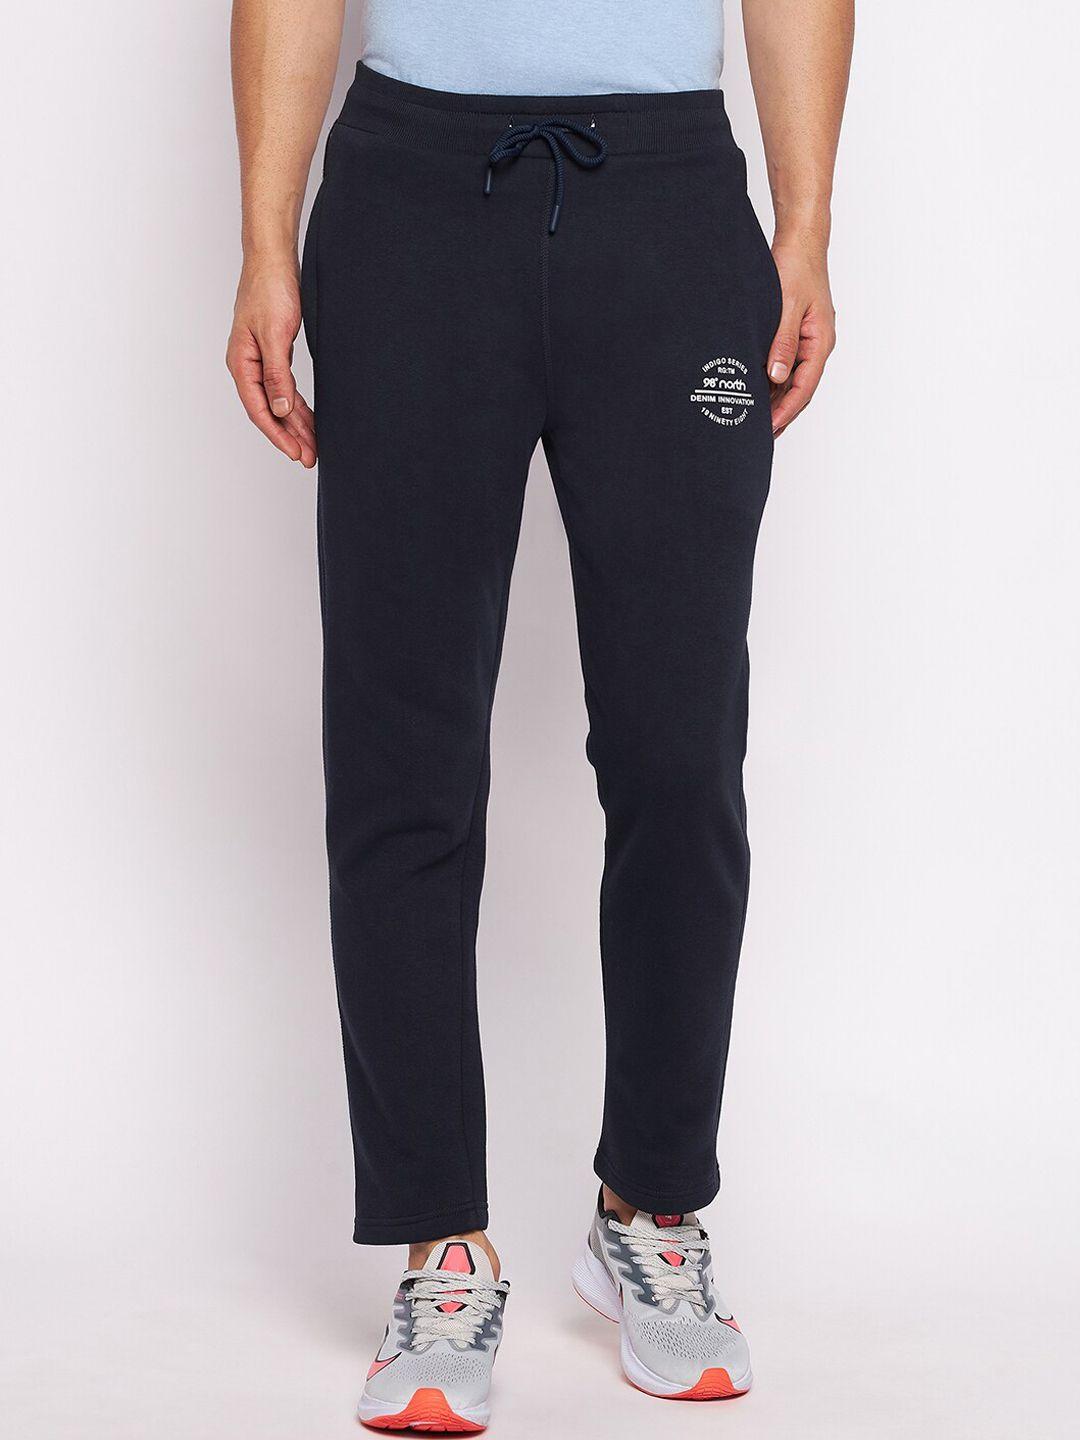 98-degree-north-men-navy-blue-solid-cotton-track-pant